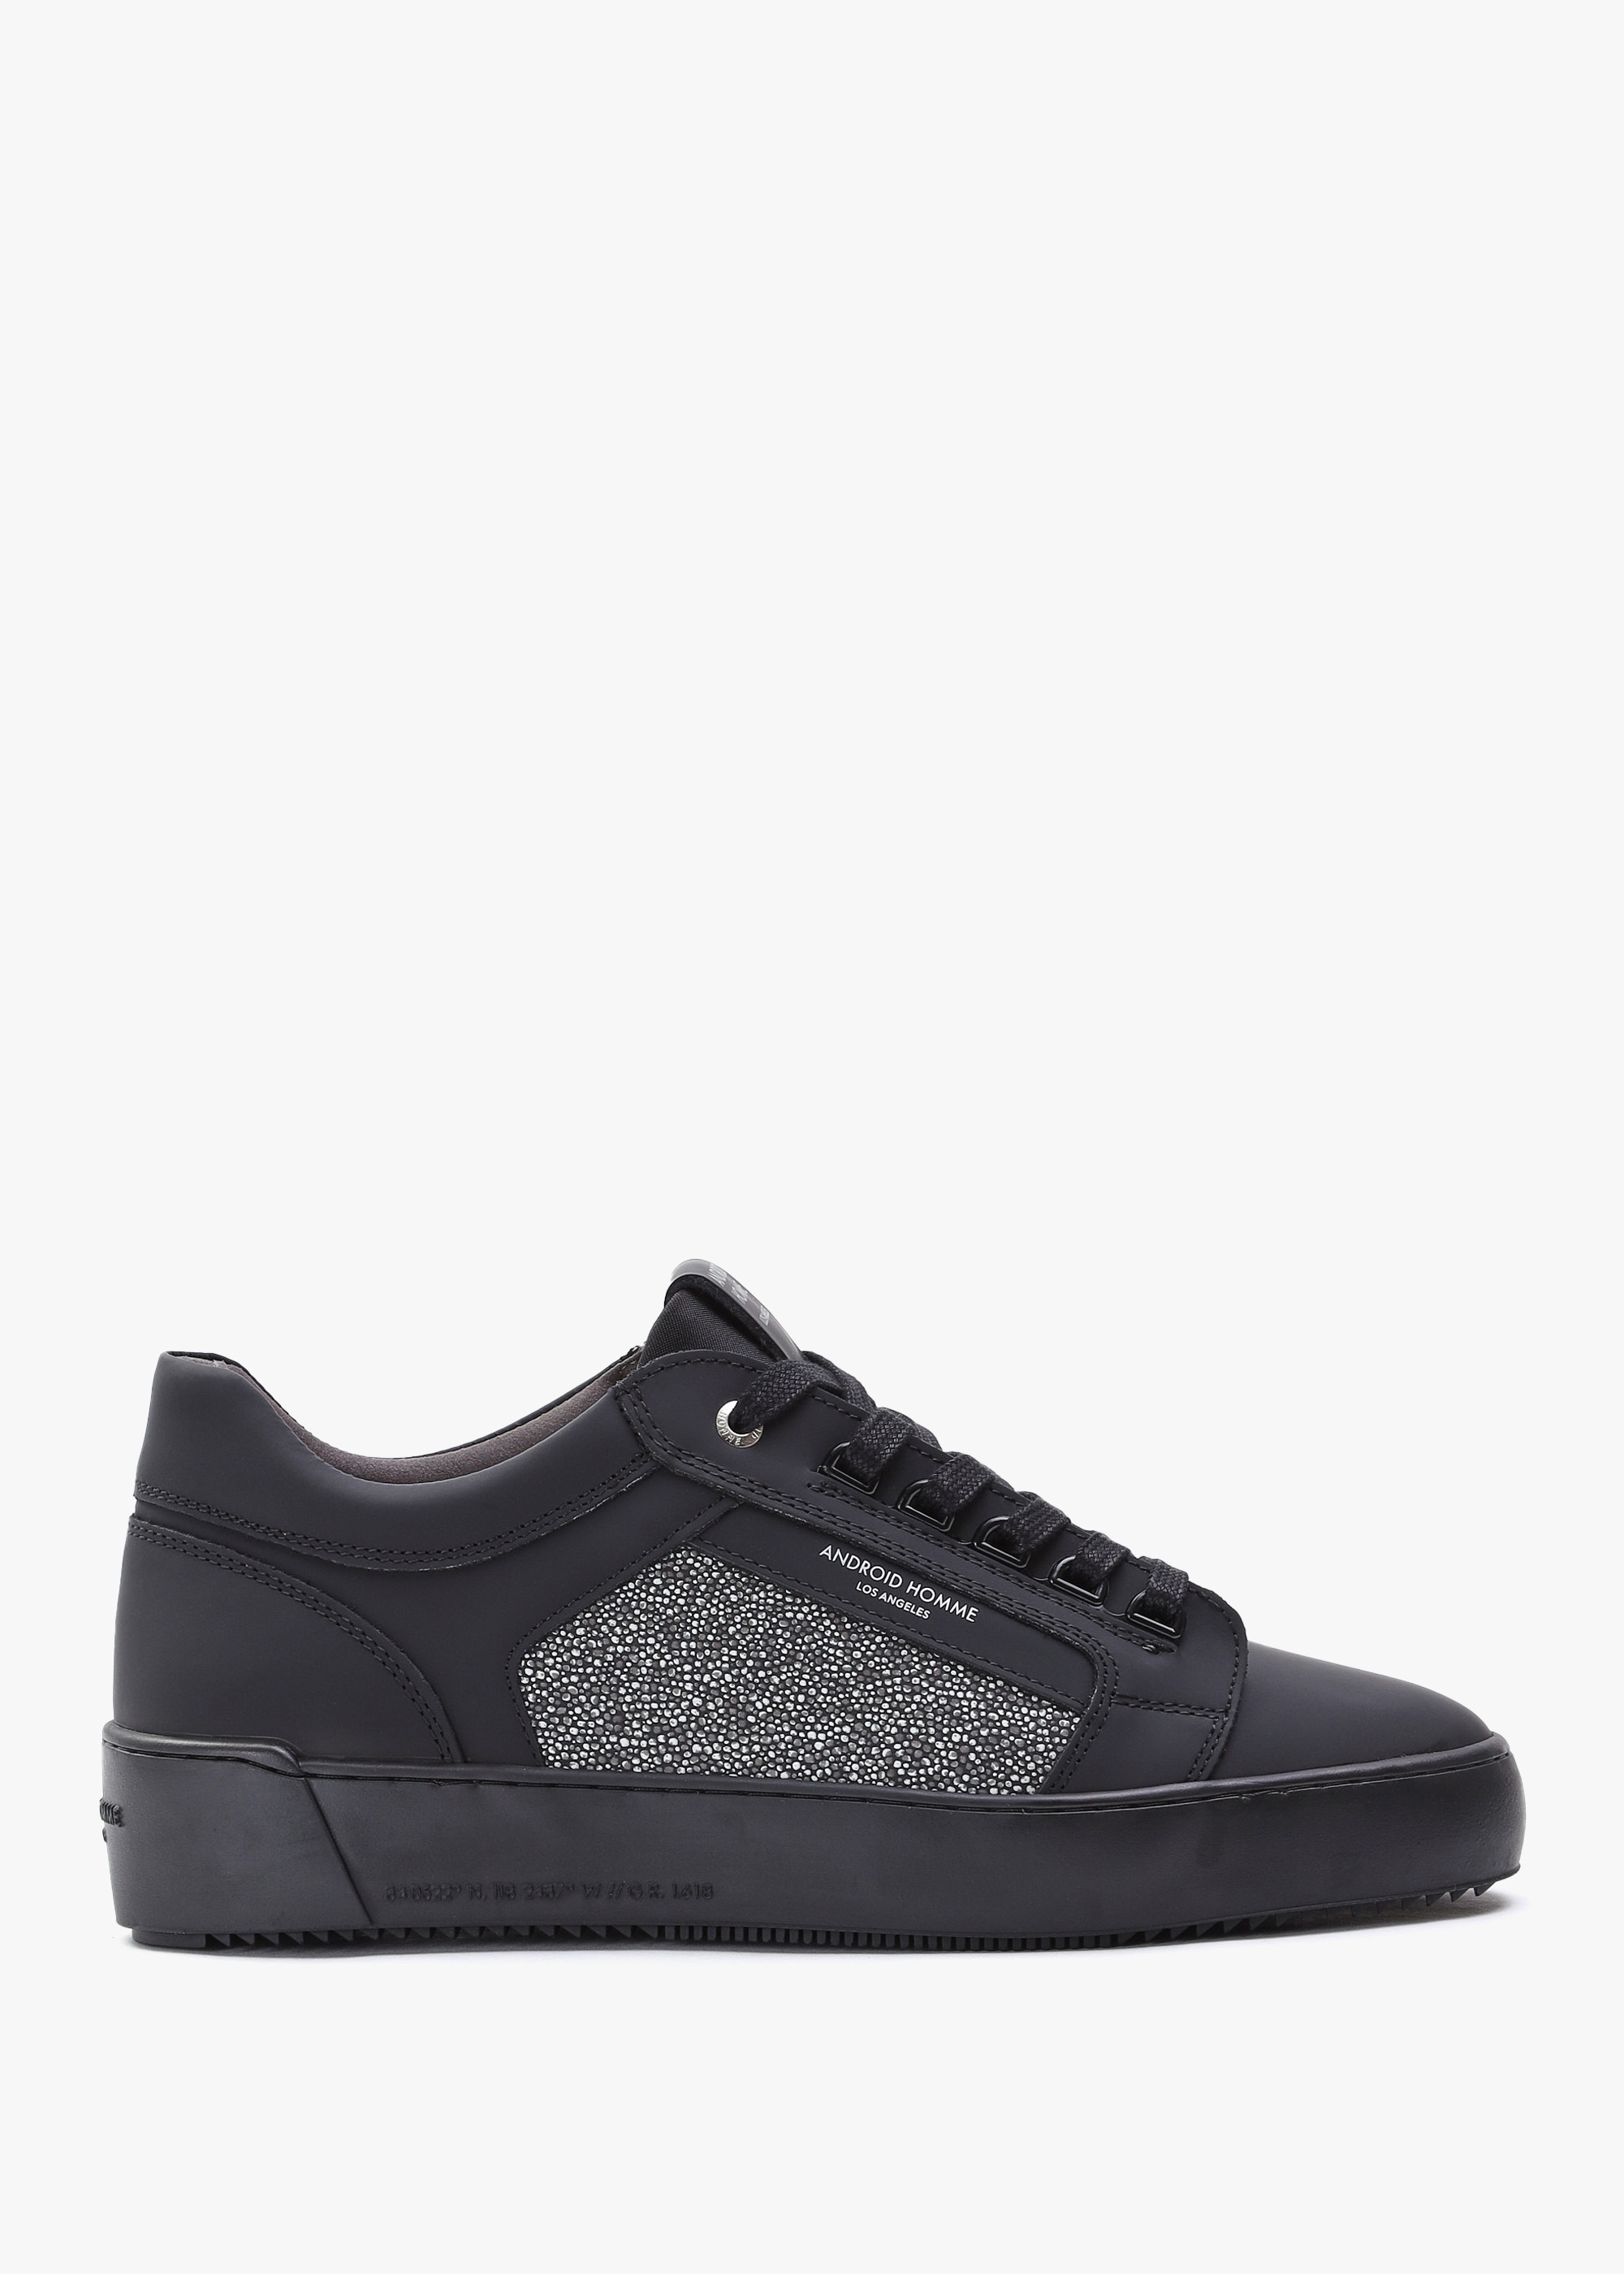 android-homme-mens-venice-reflective-caviar-trainers-in-black